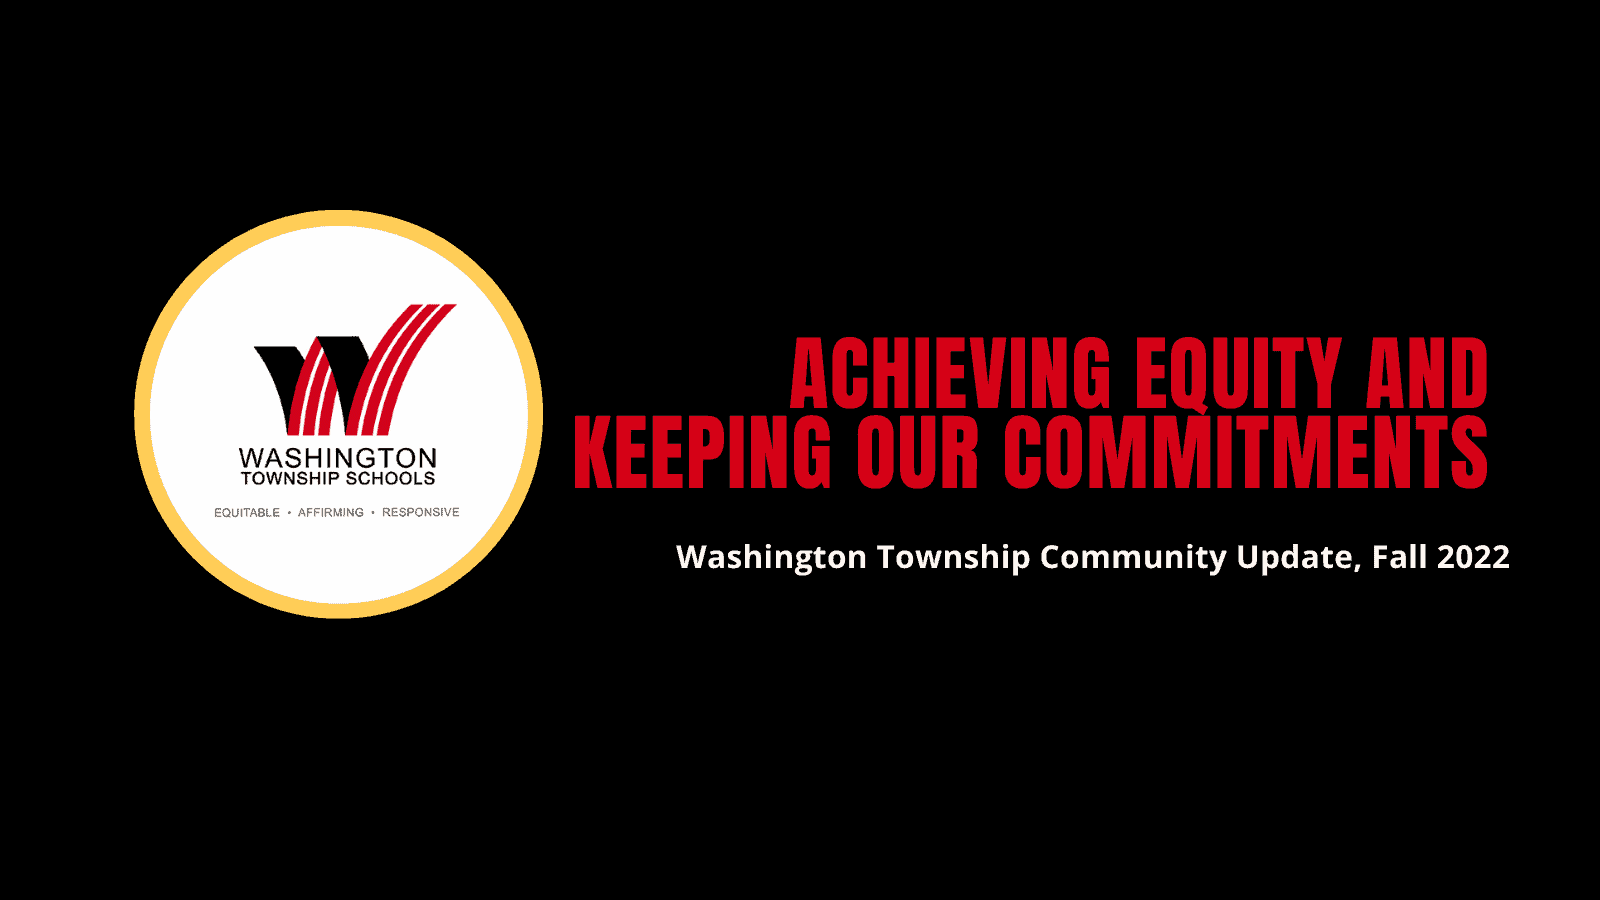 Achieving Equity And Keeping our Commitments